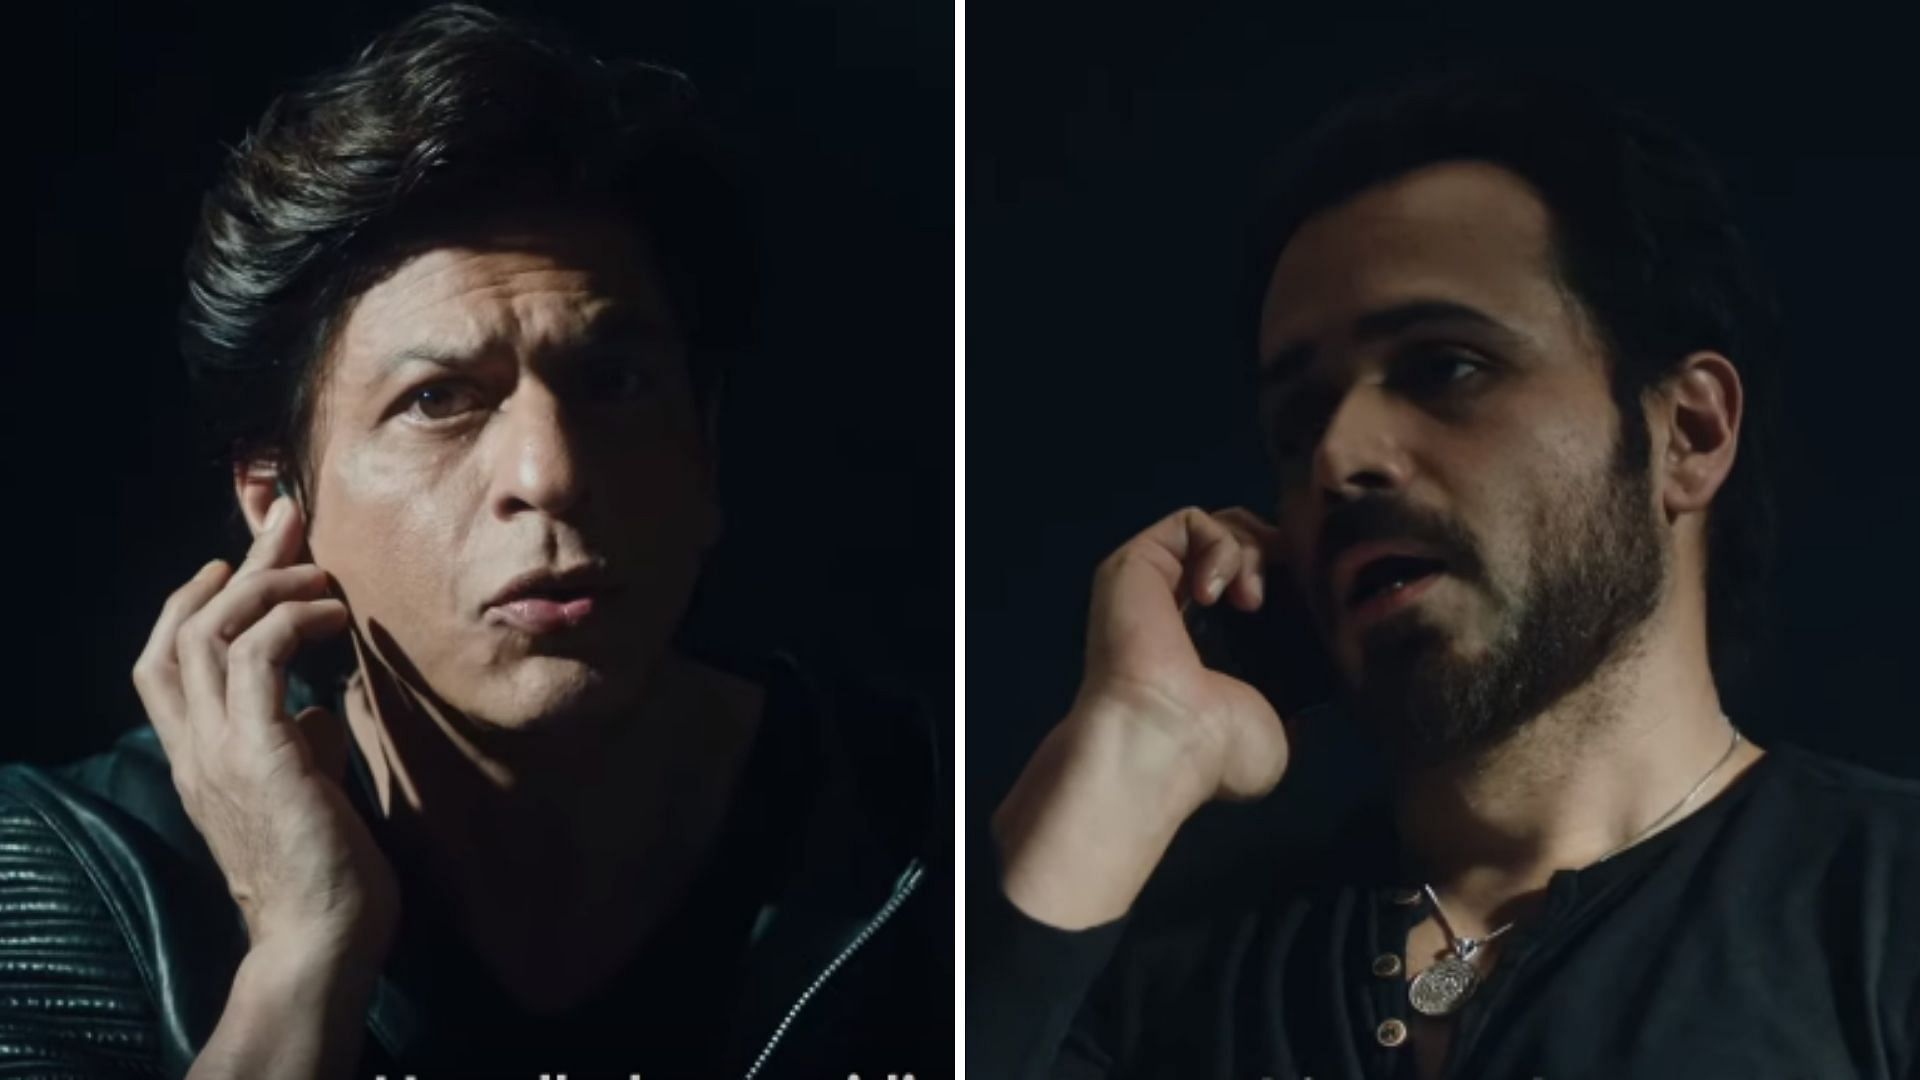 Shah Rukh Khan and Emraan Hashmi in a still from the teaser.